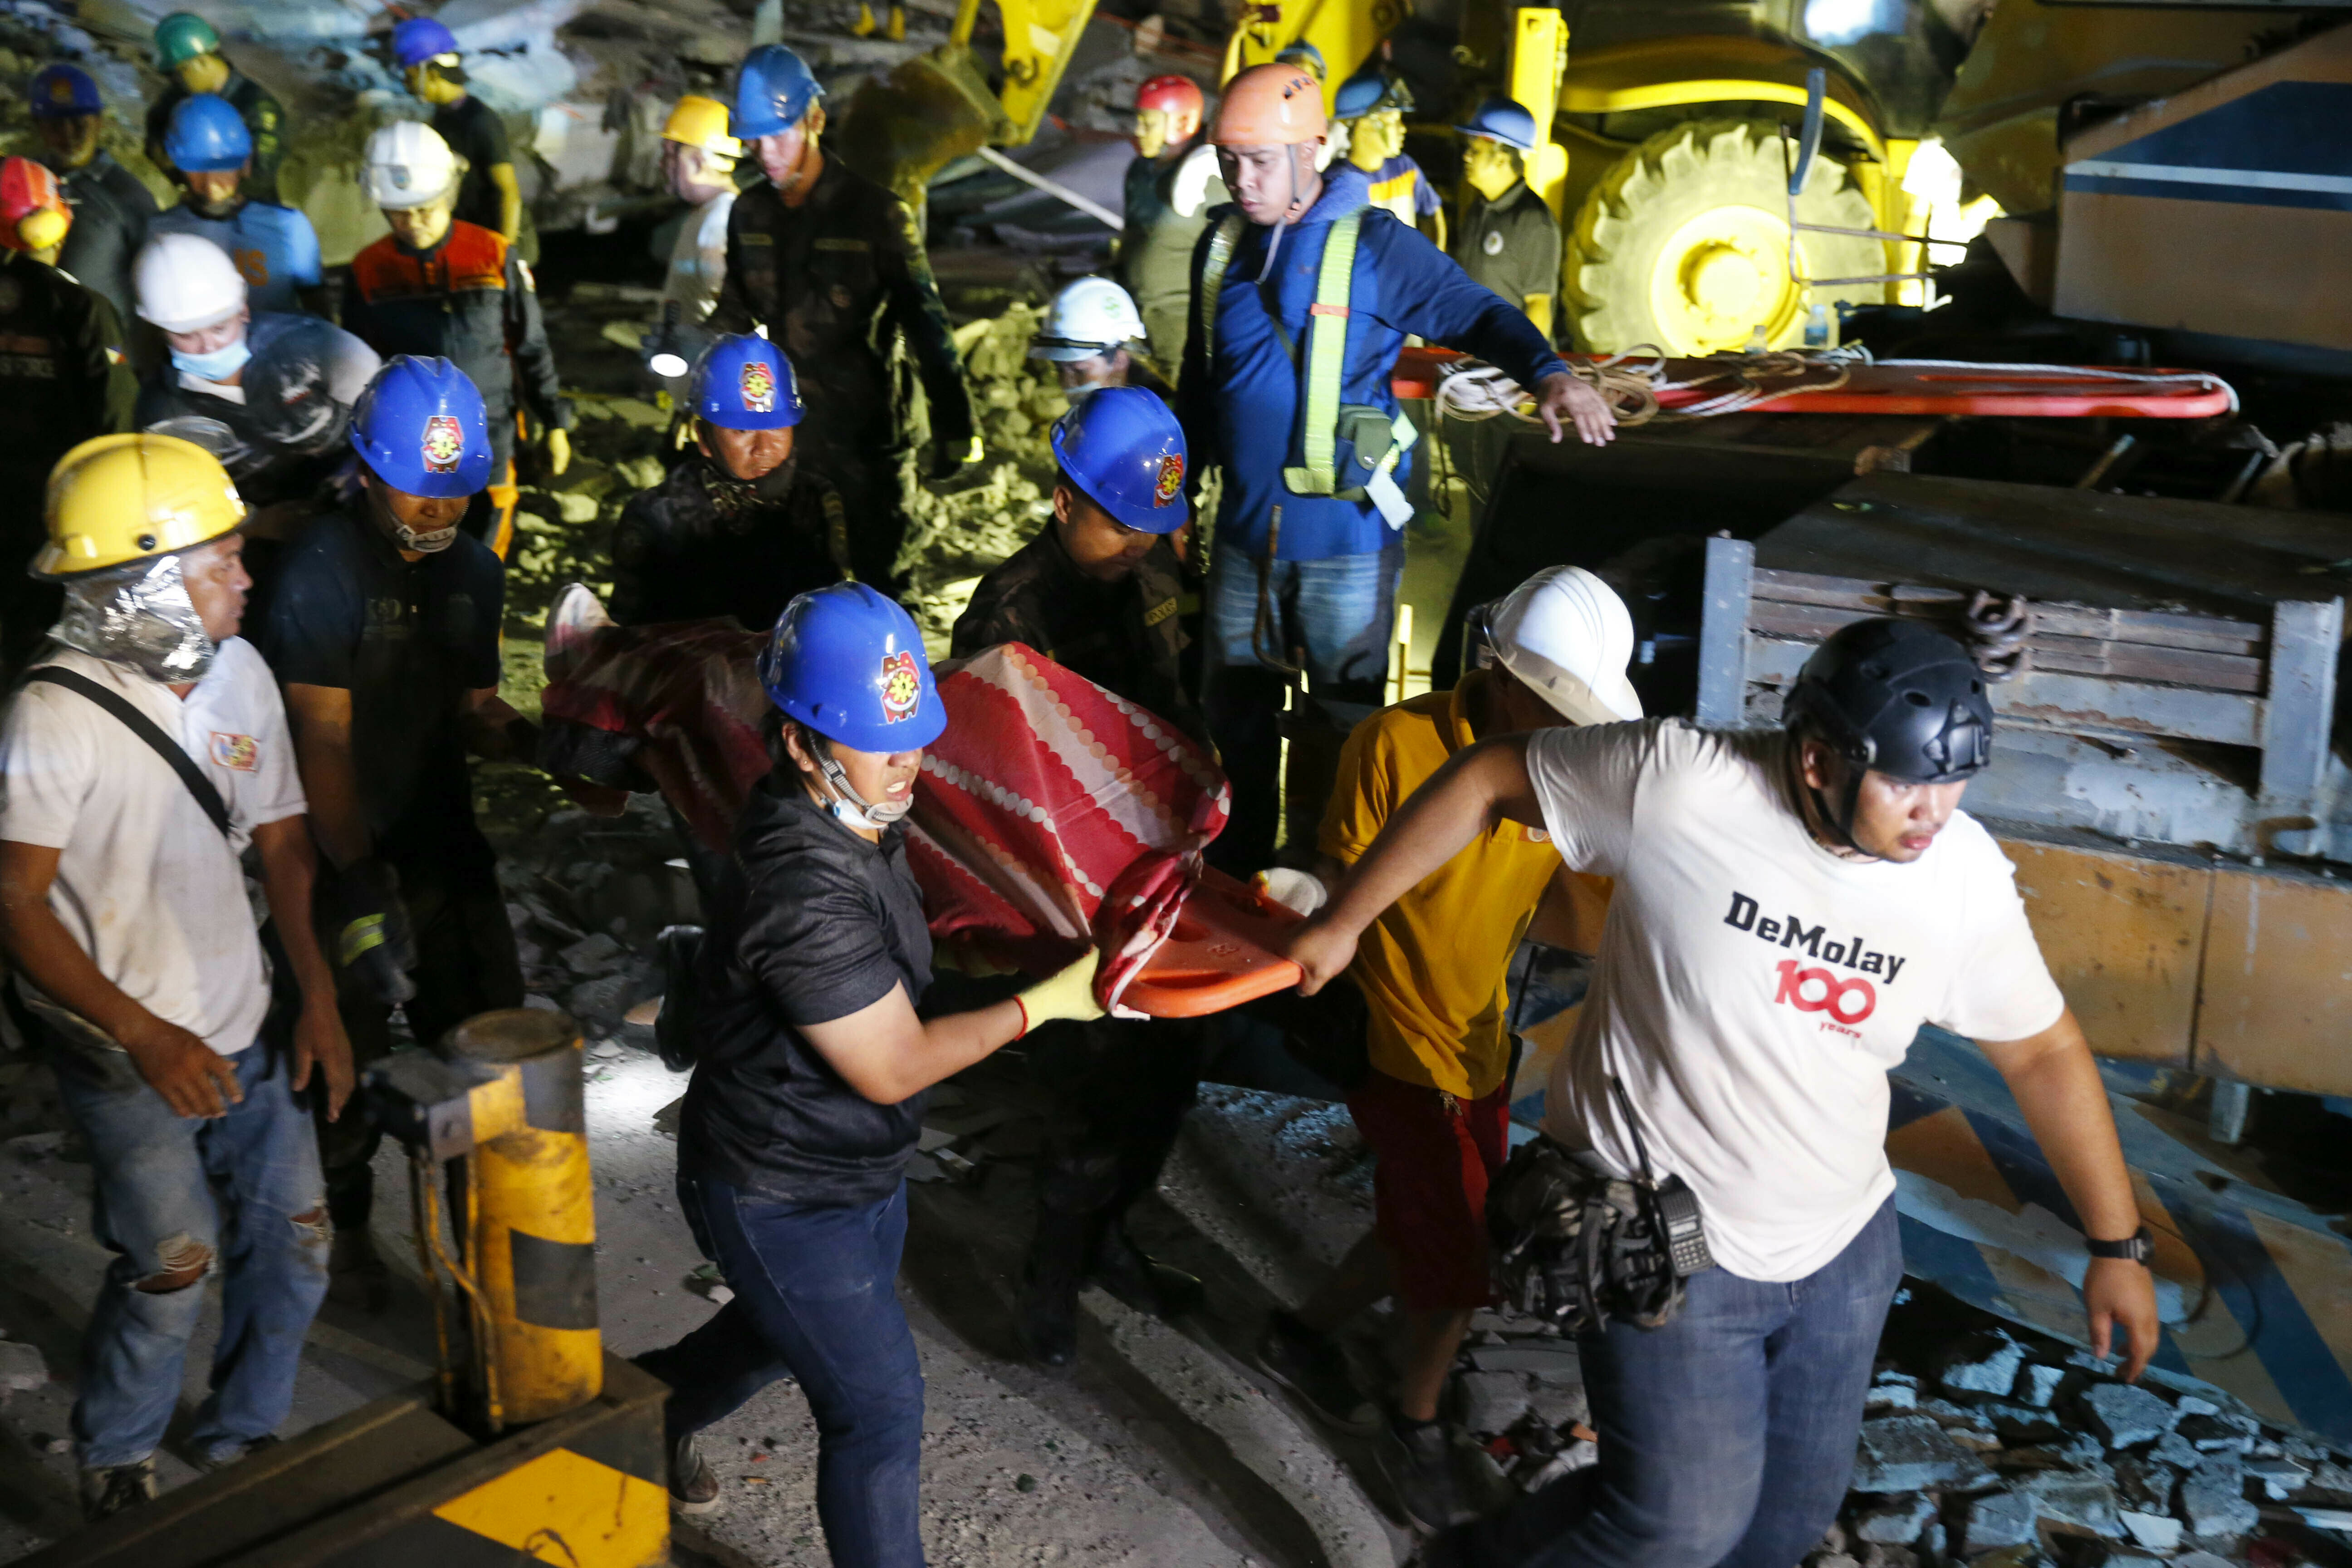 Rescuers carry a victim to a waiting ambulance after being pulled out from the rubble of a collapsed building following Monday's magnitude 6.1 earthquake in Porac township, Pampangan province north of Manila, Philippines Tuesday, April 23, 2019. A strong earthquake struck the northern Philippines Monday trapping some people in a collapsed building, damaging an airport terminal and knocking out power in at least one province, officials said. (AP Photo/Bullit Marquez)